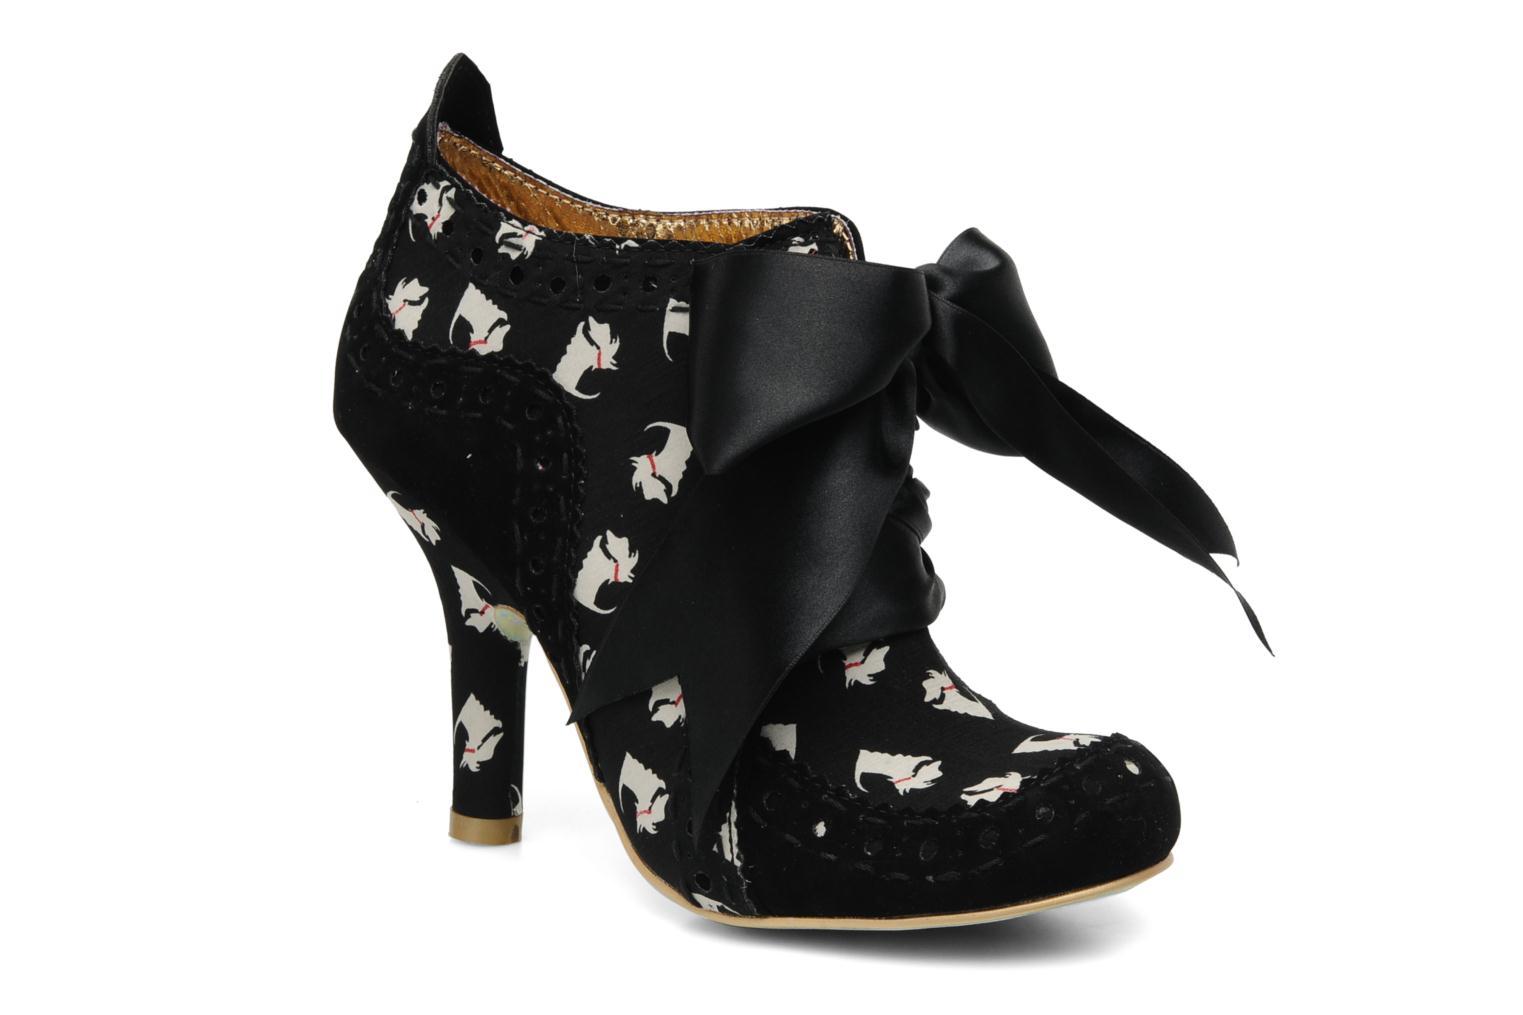 Foto Boots y Botines Irregular Choice Abigails party Mujer